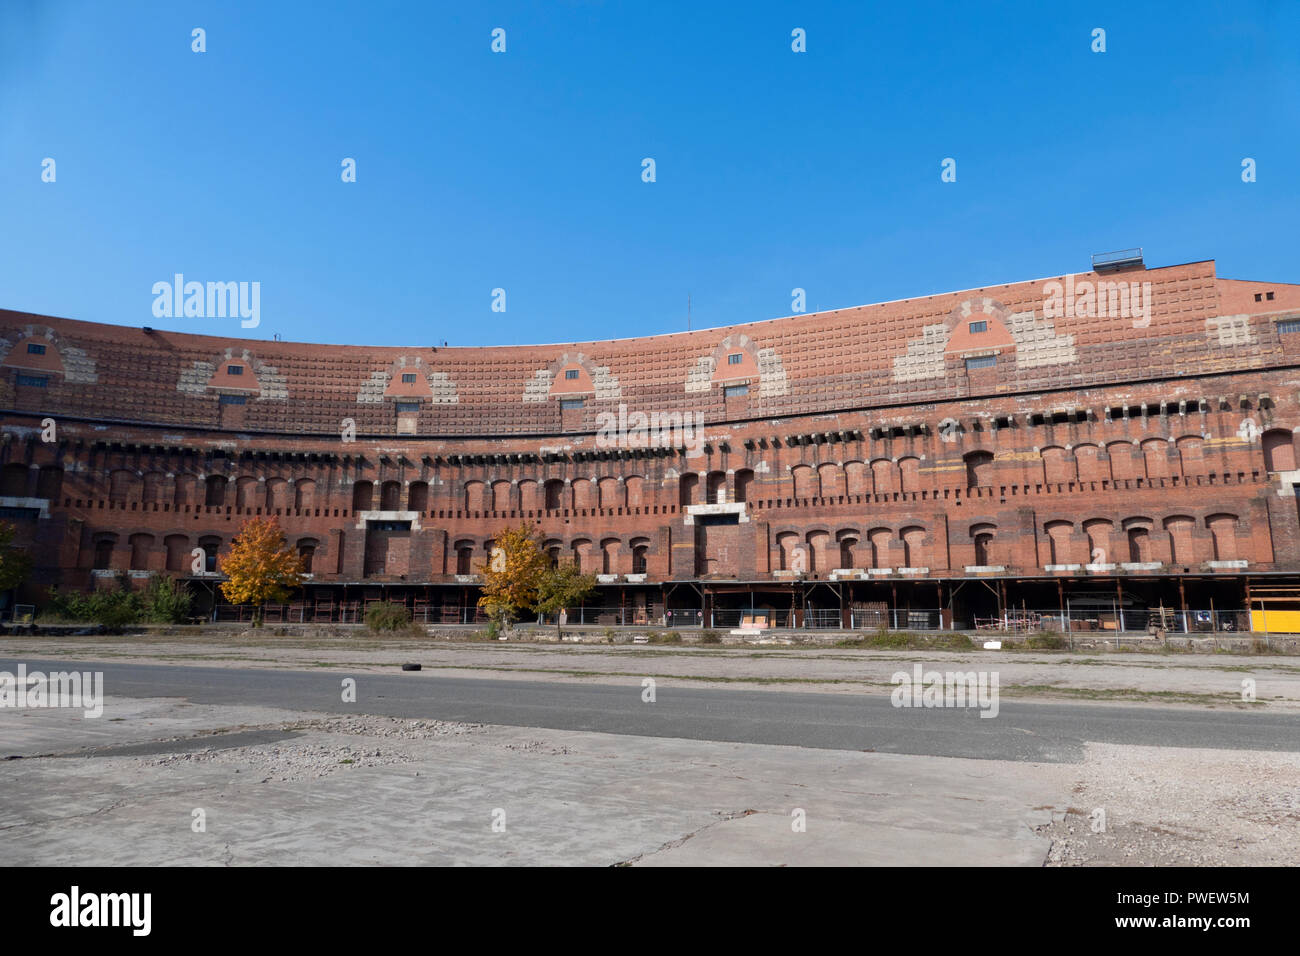 Congress Hall - Kongresshalle was planned to be a congress centre for the NSDAP. Built by the Nazis for their rallies it was never completed. Stock Photo